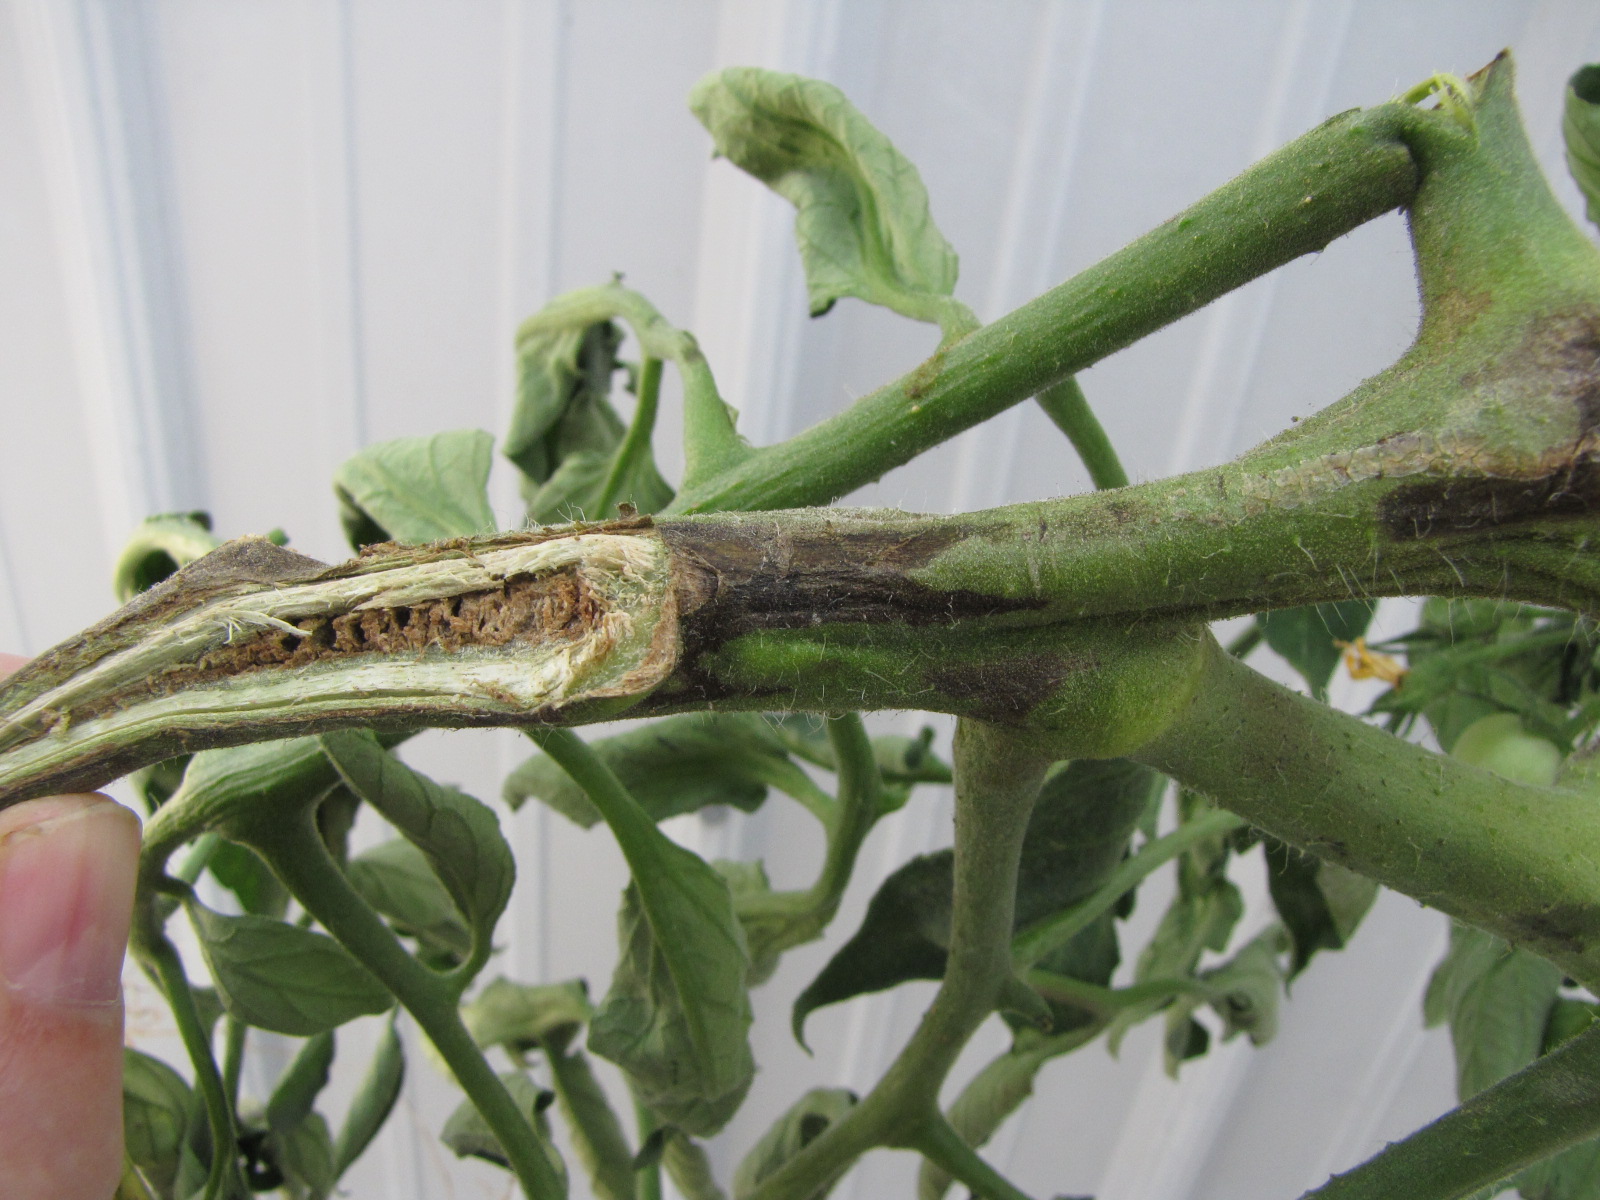 Dark necrosis on stem and chambered pith caused by tomato pith necrosis.